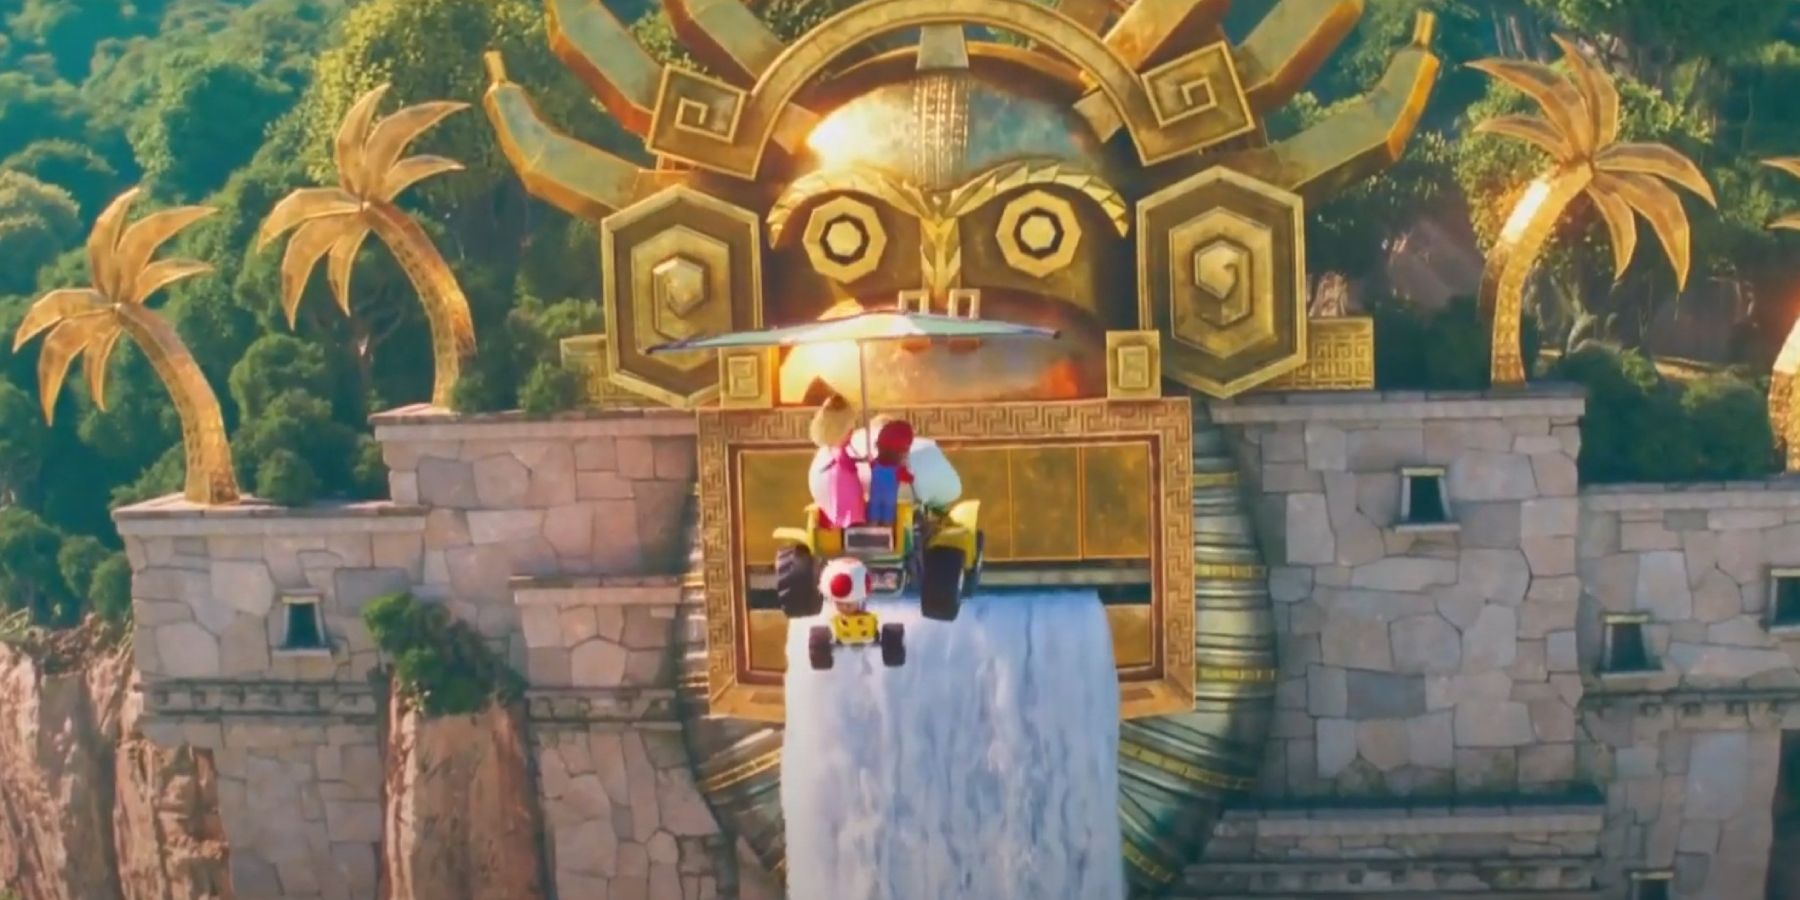 Mario and Peach flying towards Donkey Kong Golden Temple